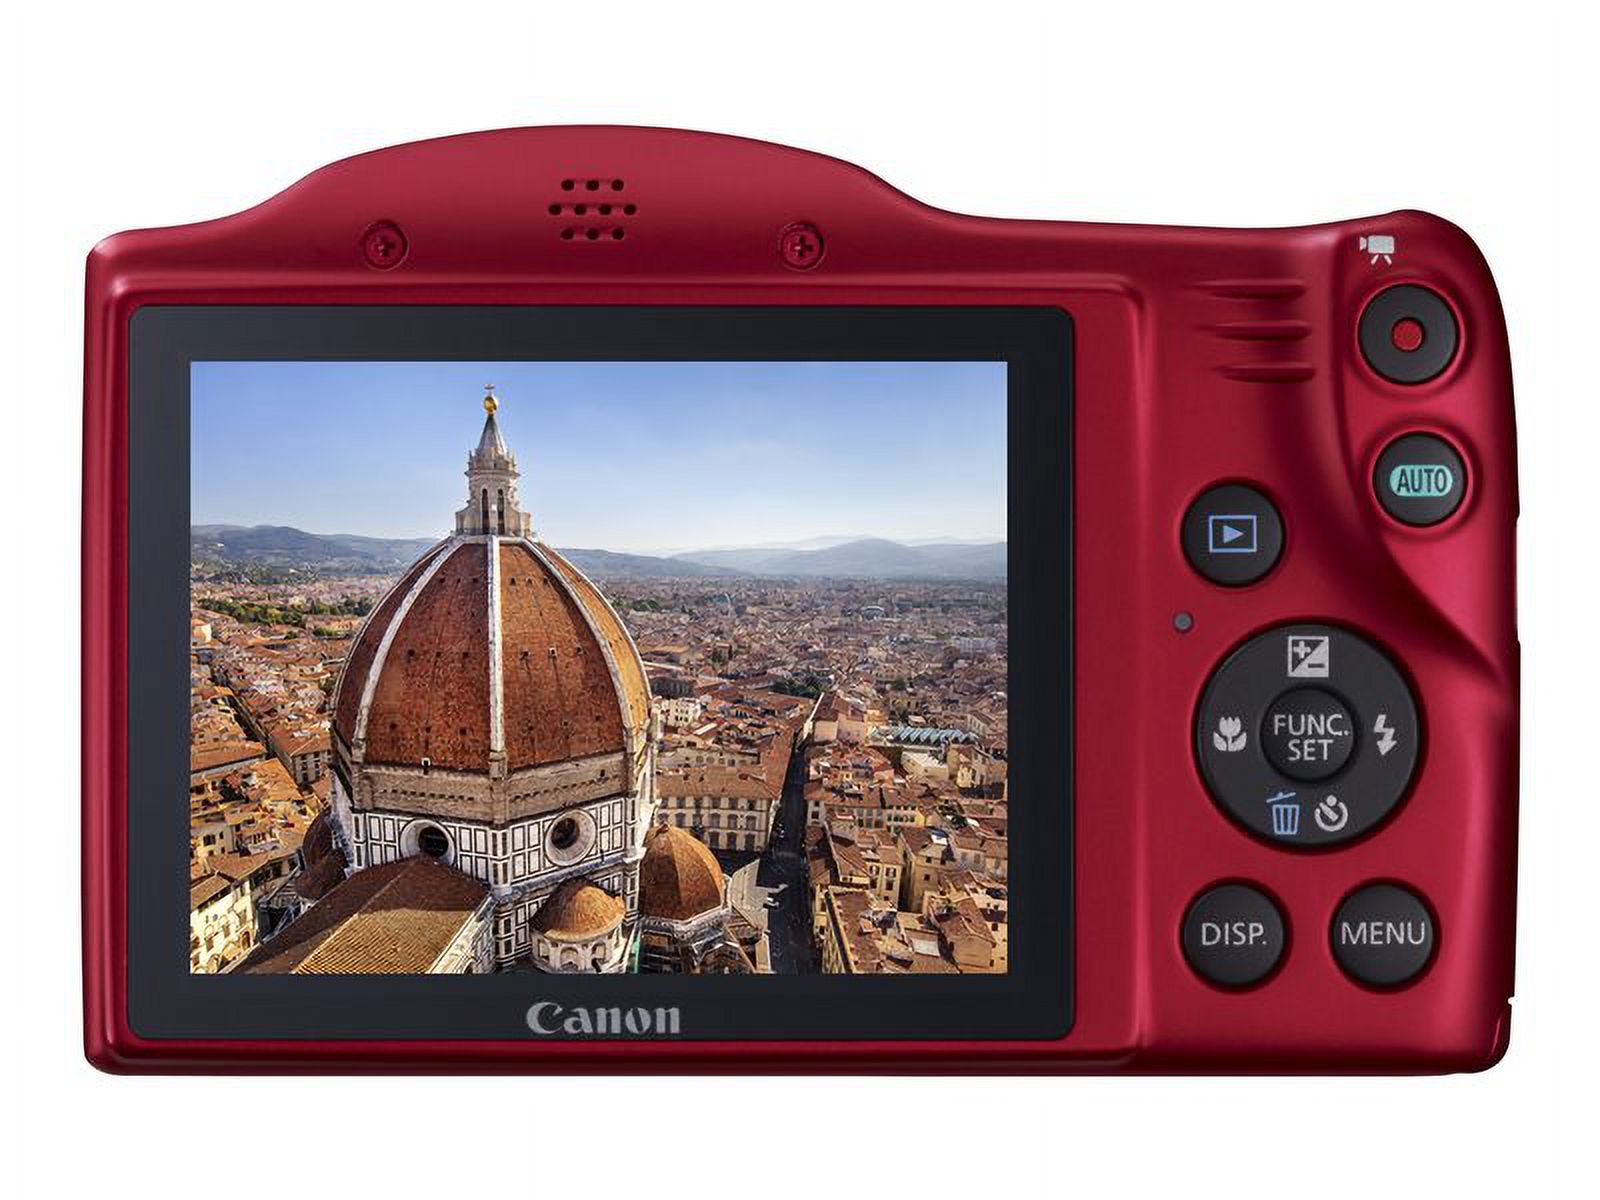 Canon PowerShot SX400 IS - Digital camera - High Definition - compact - 16.0 MP - 30 x optical zoom - red - image 39 of 72